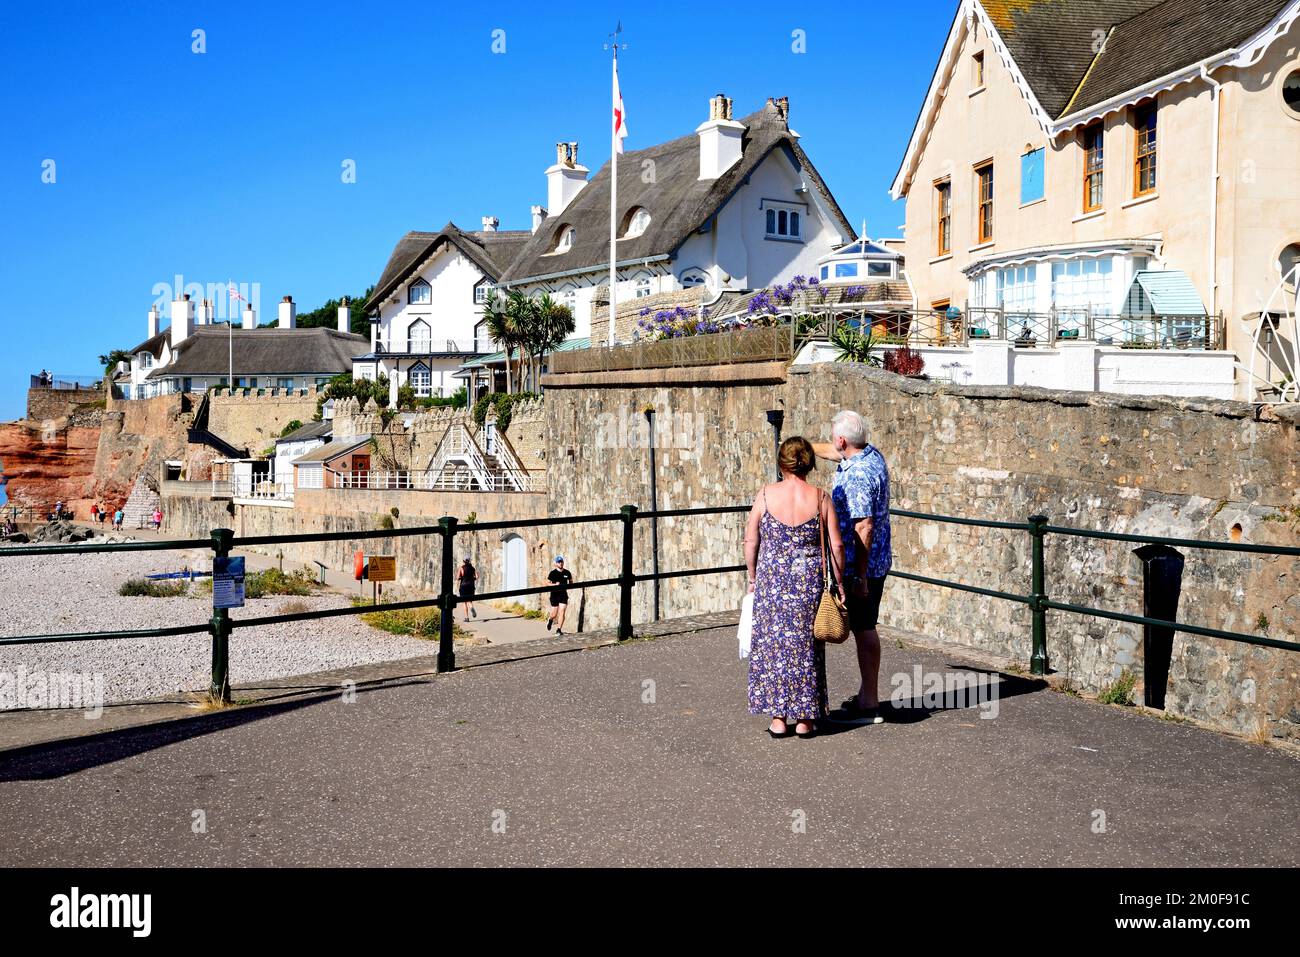 View of traditional thatched houses overlooking the beach at the West End of the town with a couple standing in the foreground, Sidmouth, Devon, UK. Stock Photo